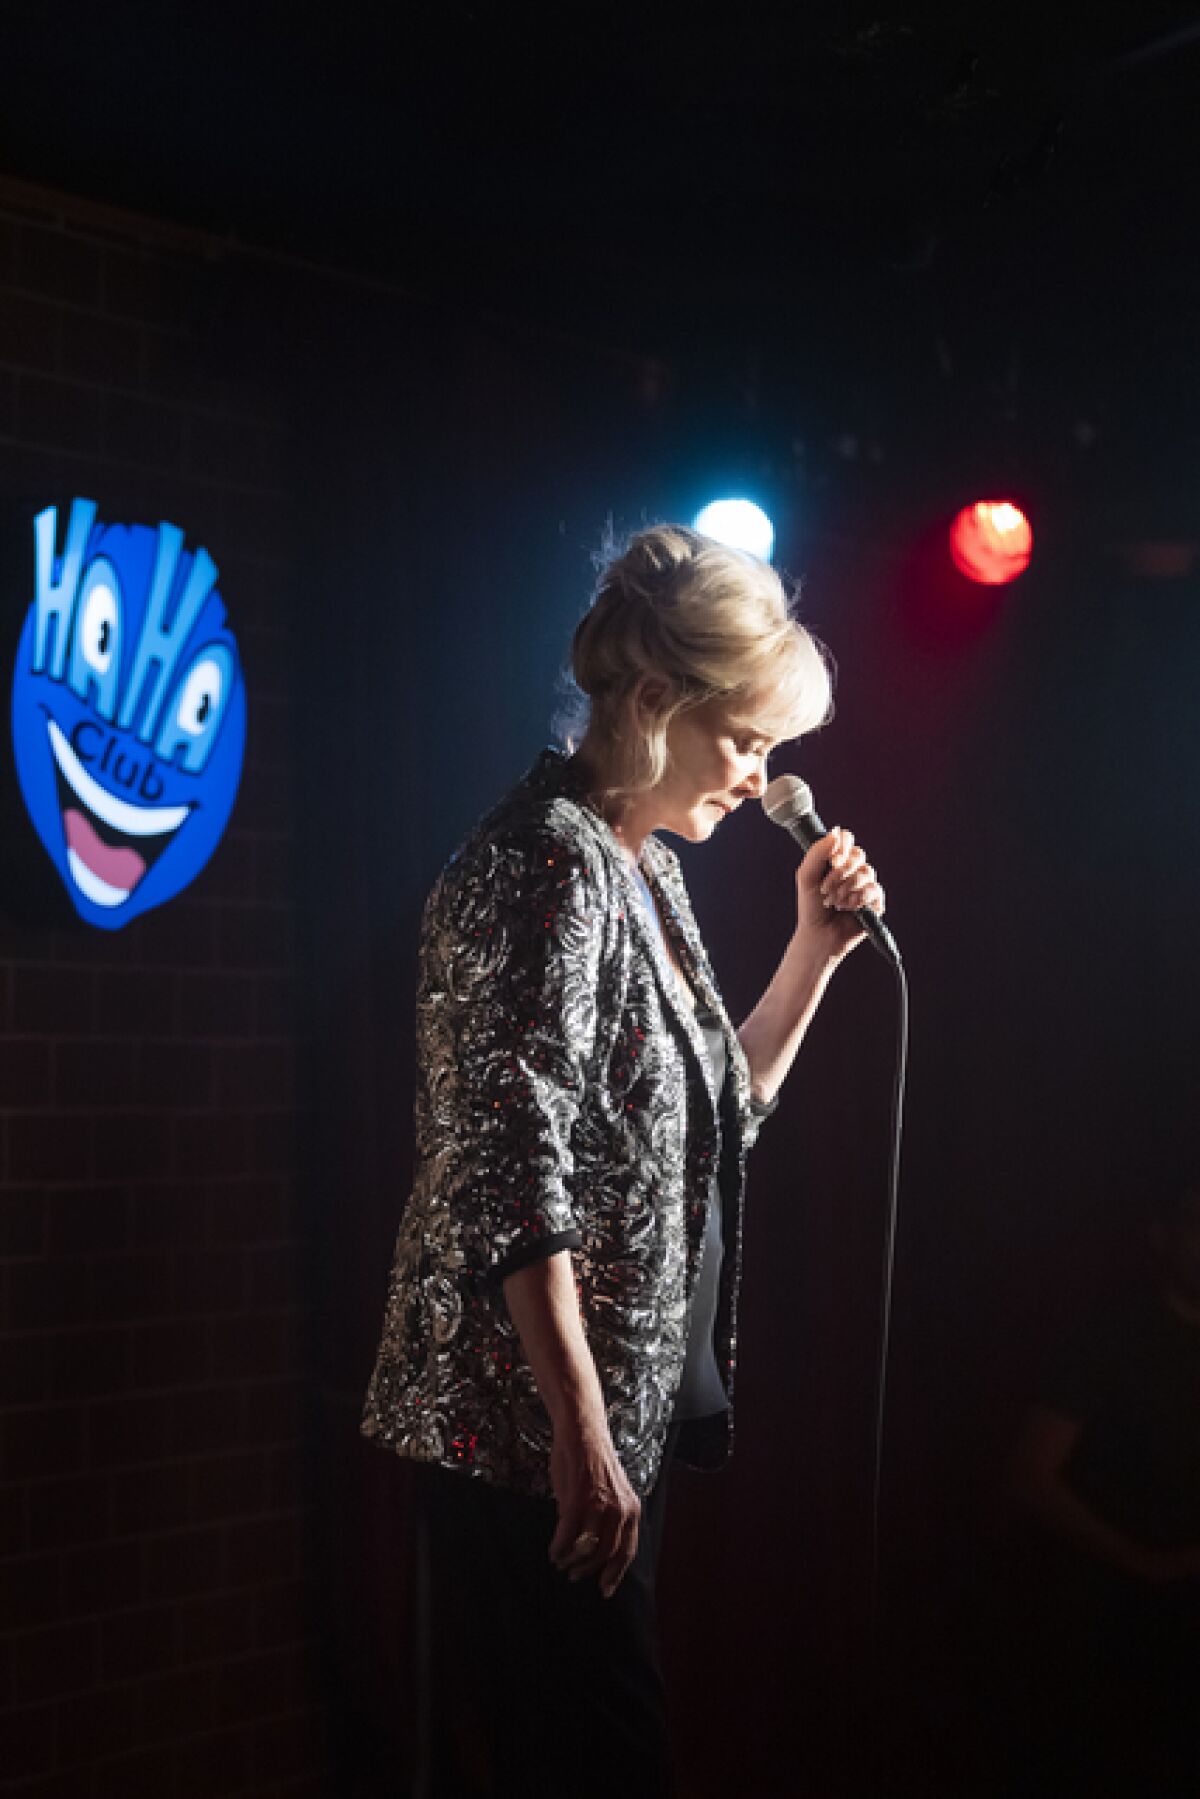 A woman doing stand-up at a comedy club